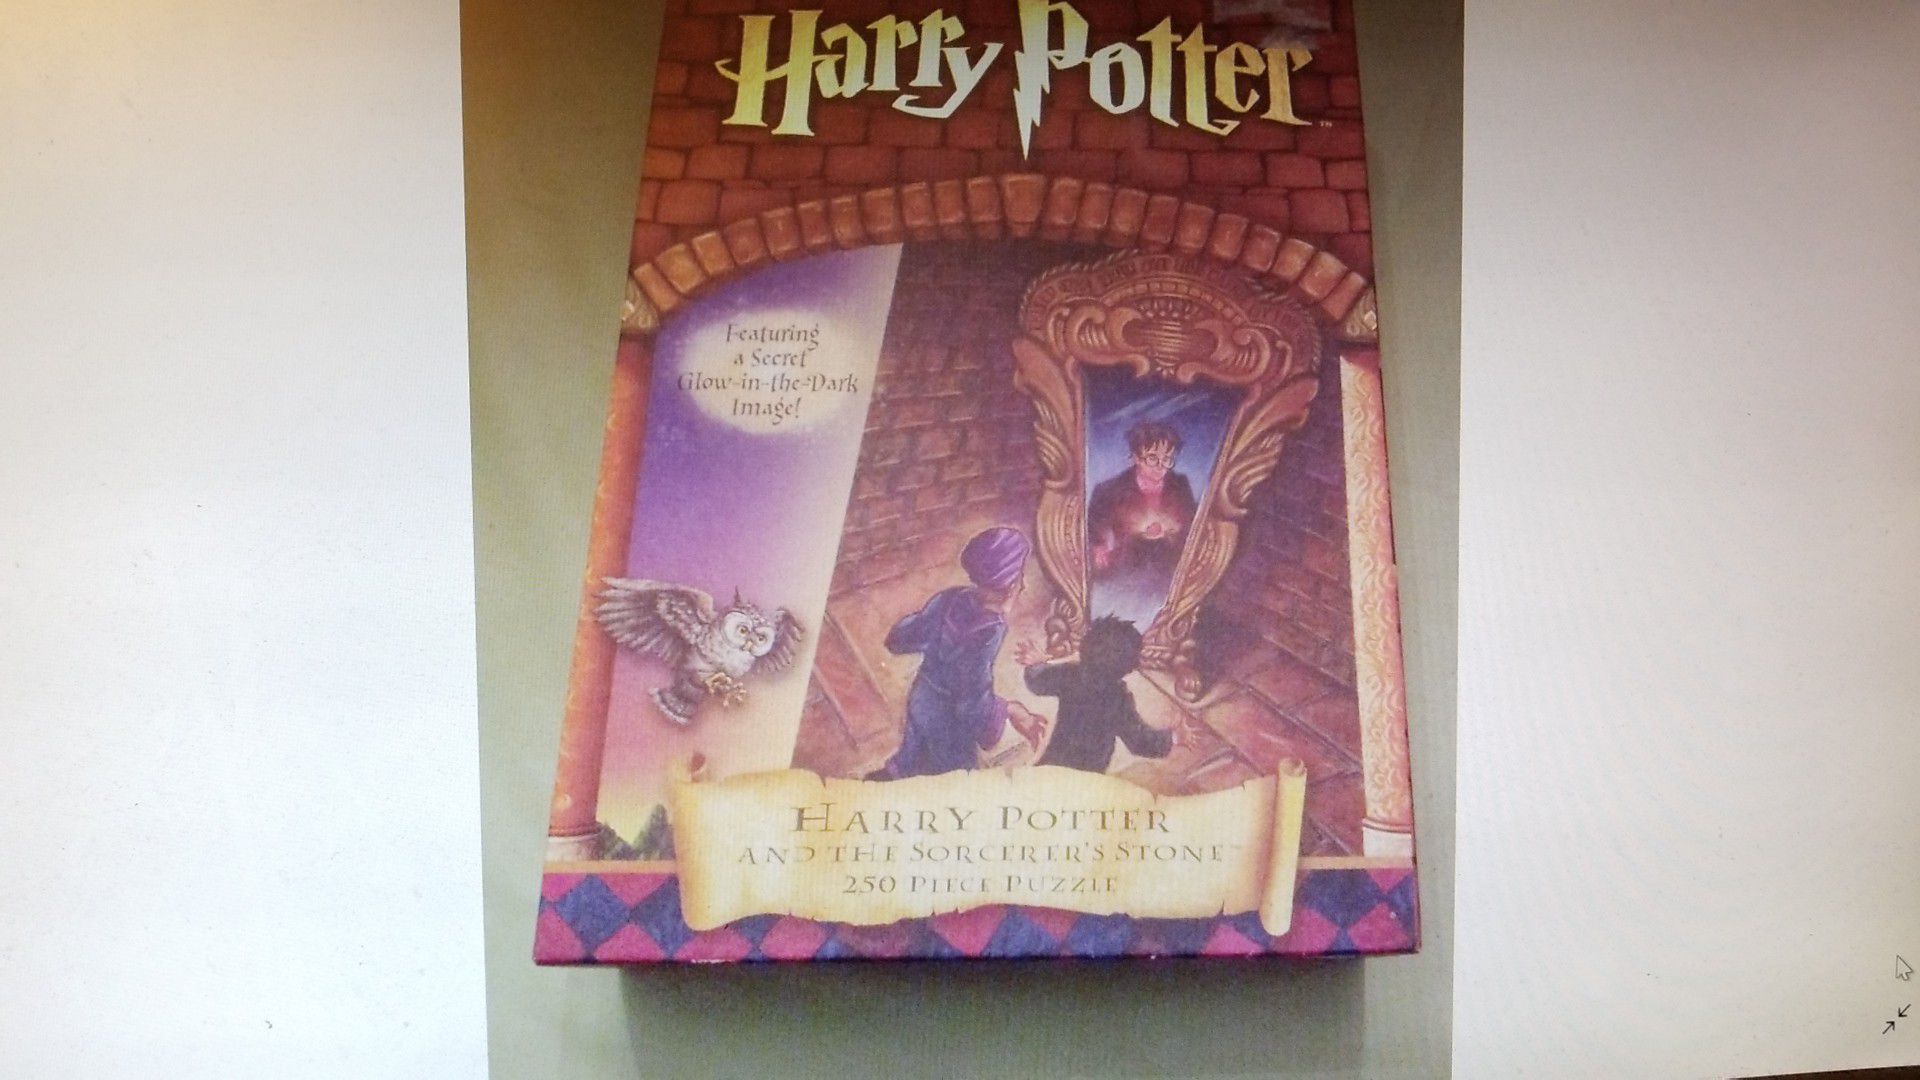 Harry Potter and the Sorcerer's stone 250 piece puzzle glow in the dark.